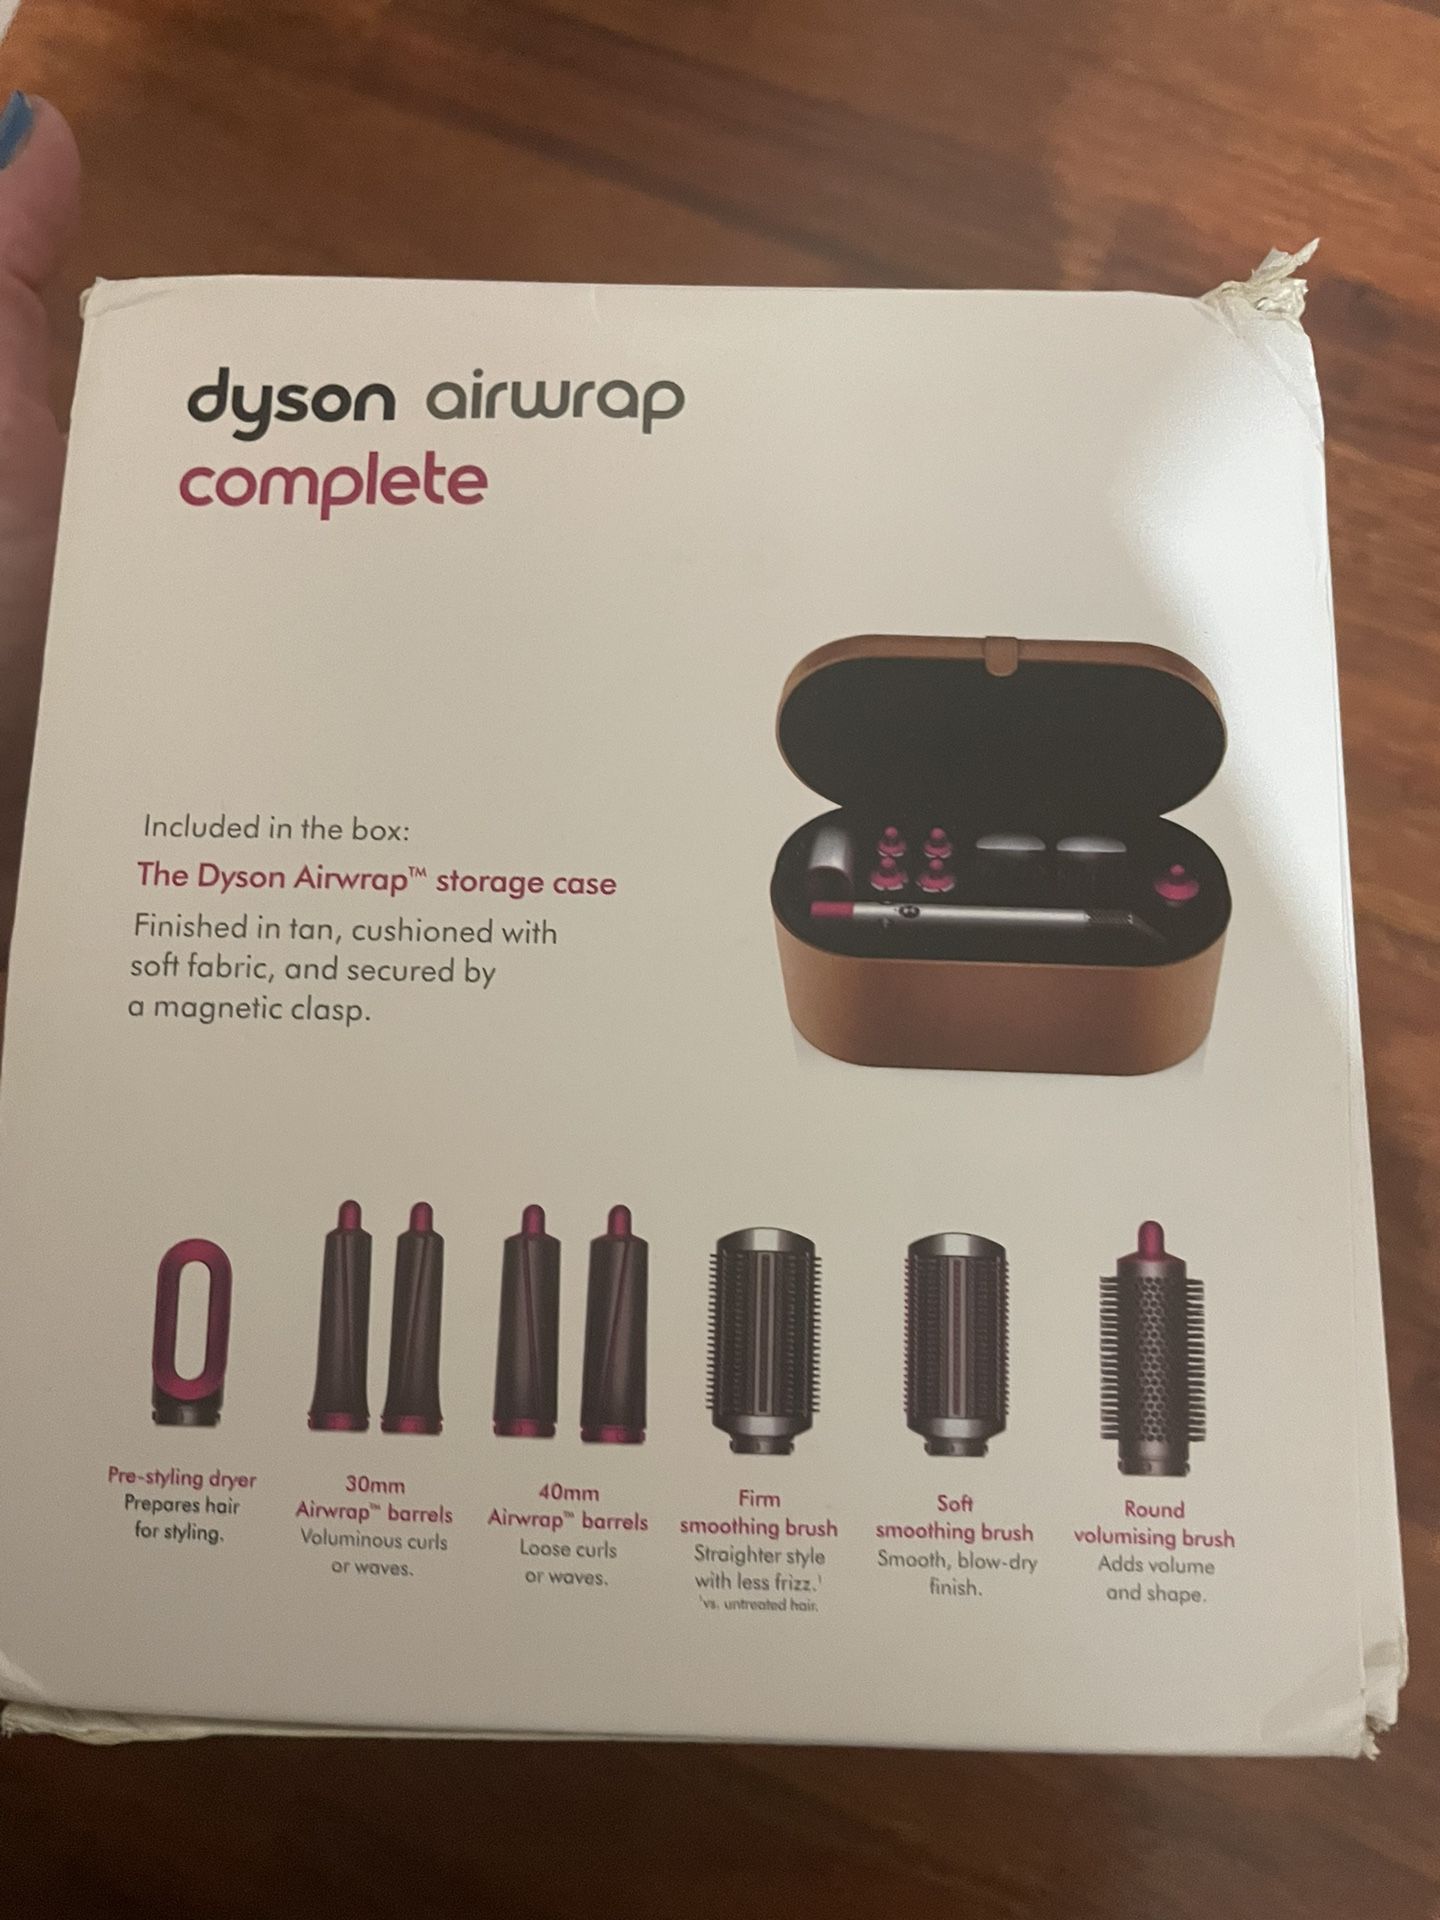 dyson airwrap Never Use Opened Box 